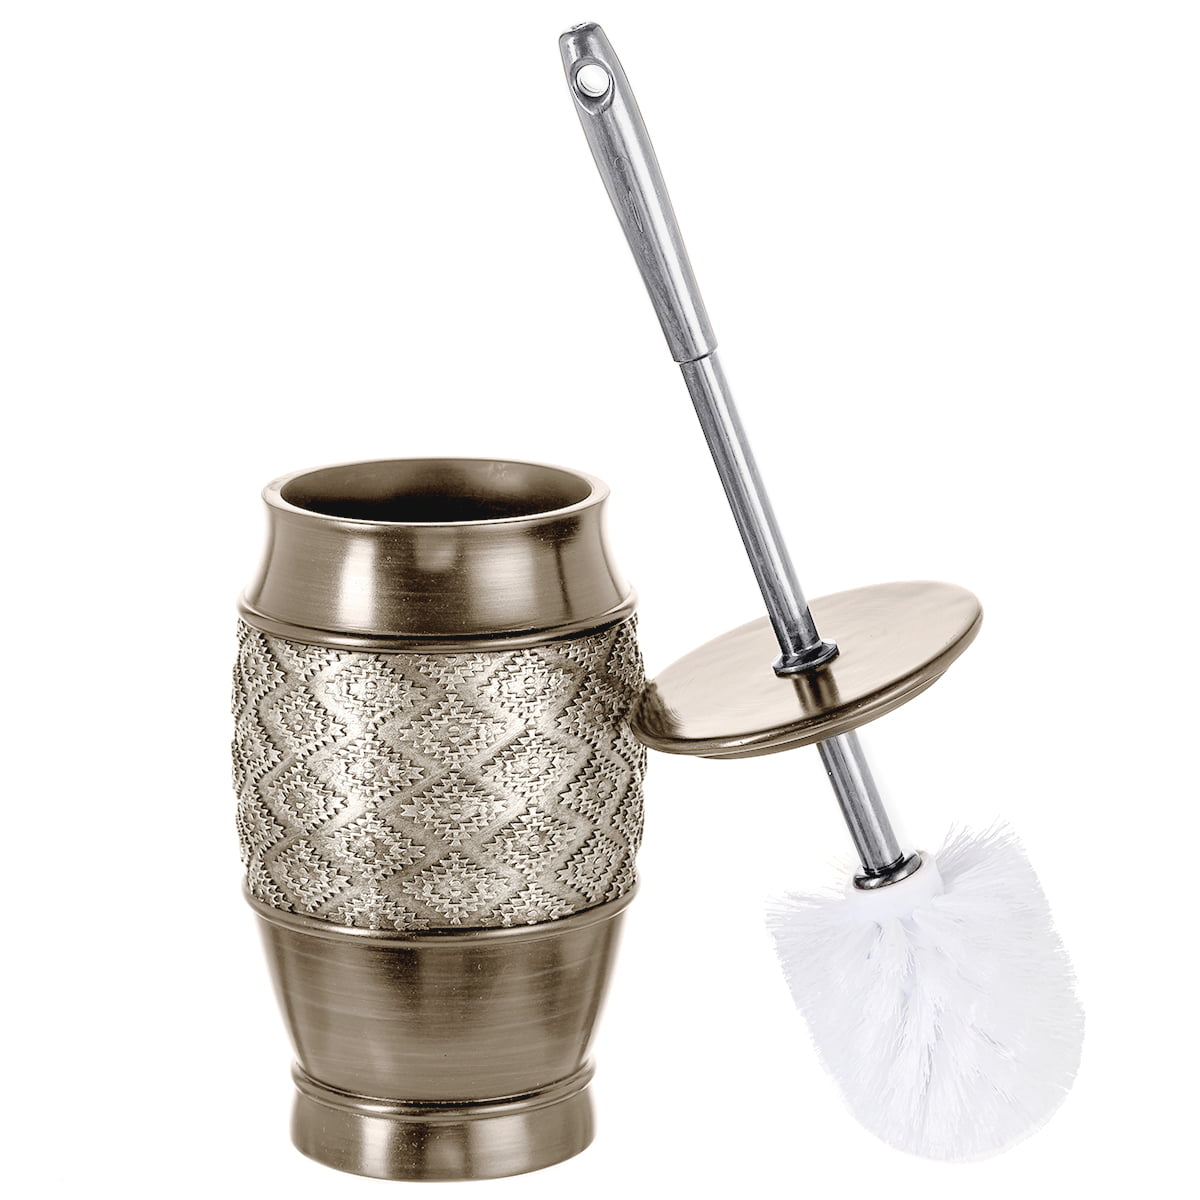 Relaxdays Stainless Steel Approx 73 x 21.5 x 27.5 cm Modern Roll Toilet Brush in Hygenic Plastic Holder Metal Black 27.5x21.5x73 cm Square Free-Standing Butler 